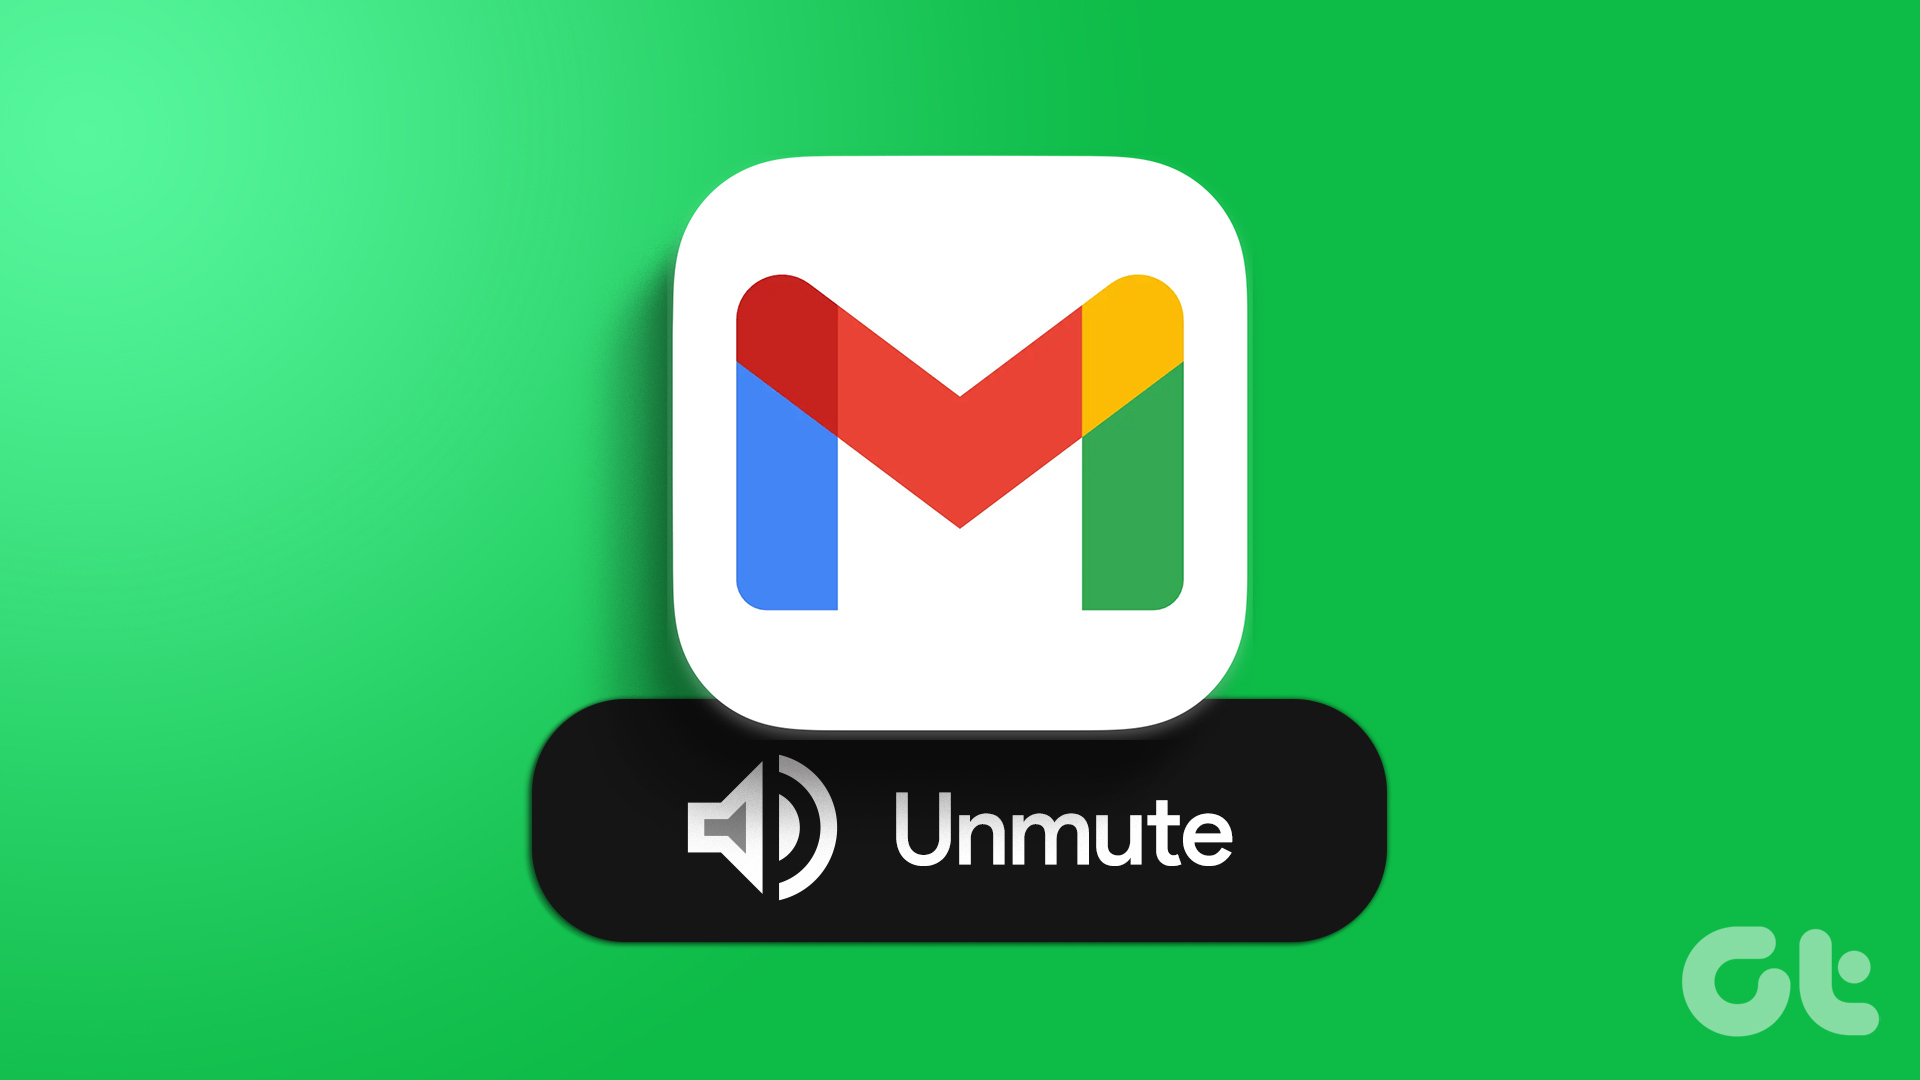 How to Unmute Email in Gmail